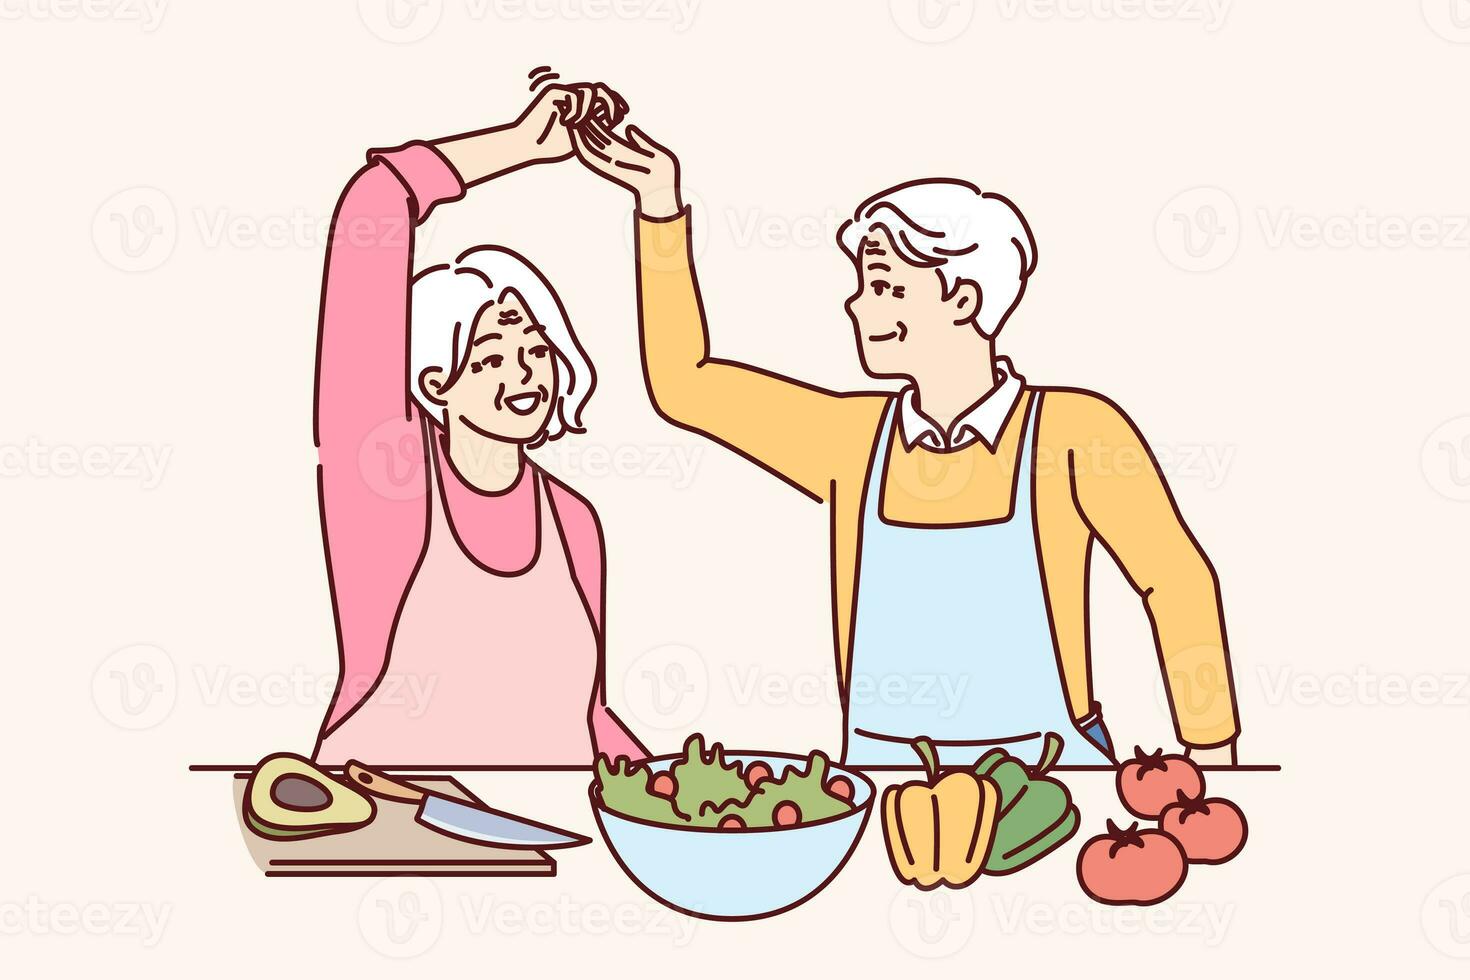 Elderly couple of vegans cooks dinner and dances together, calling for healthy lifestyle photo